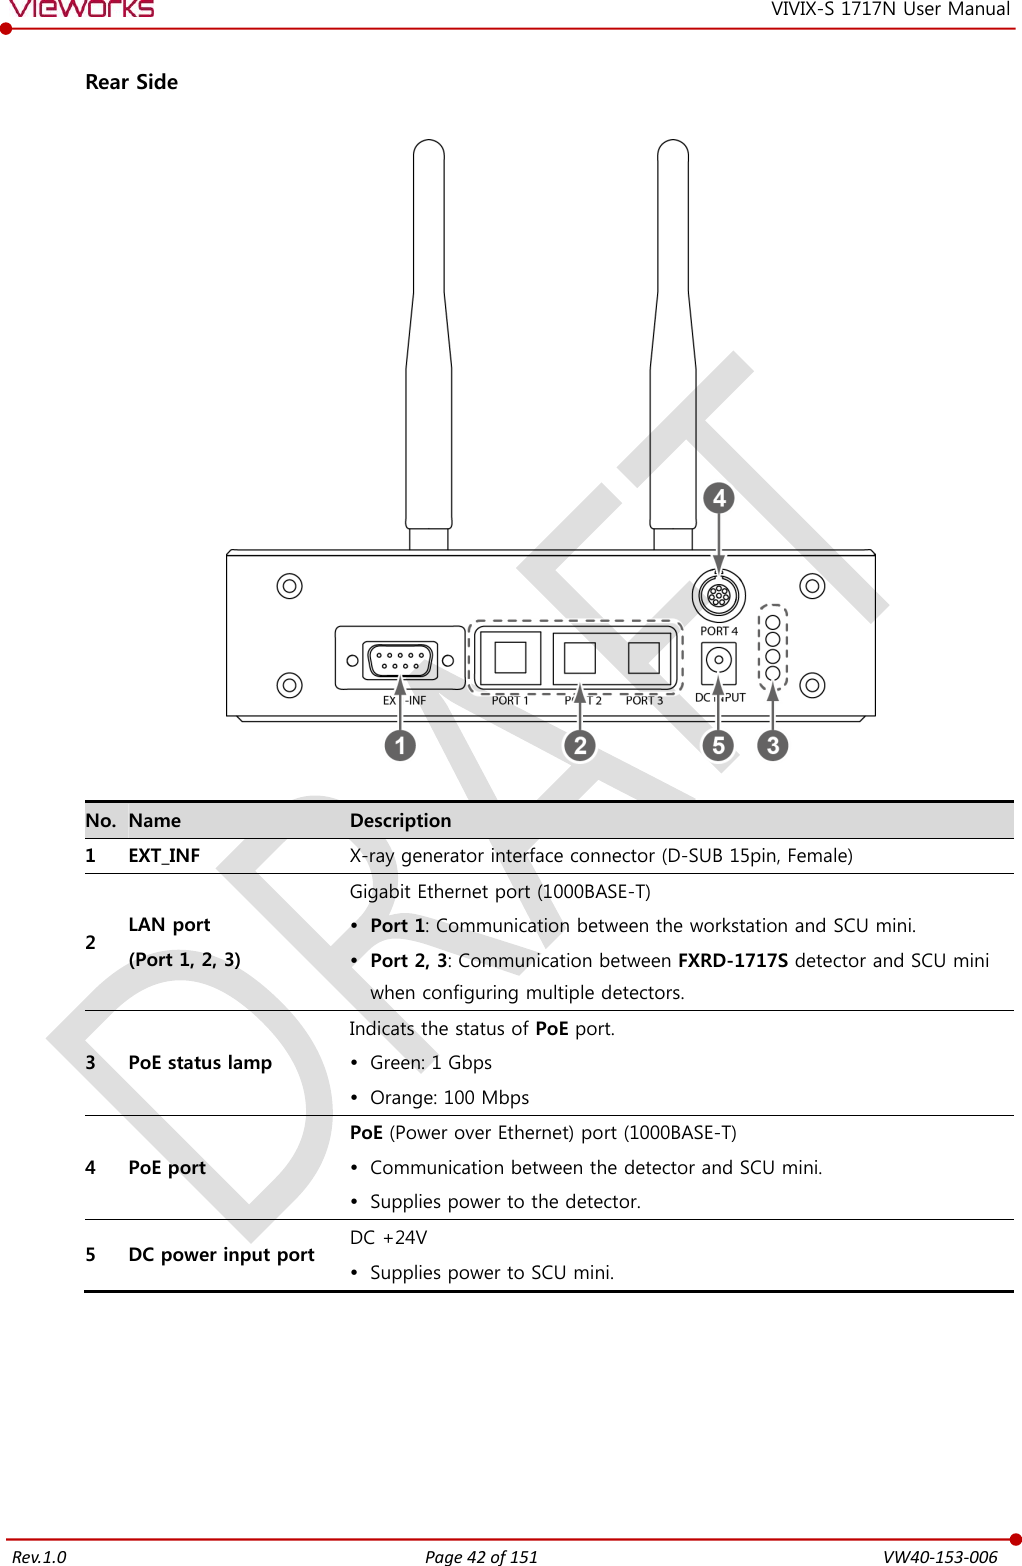   Rev.1.0 Page 42 of 151  VW40-153-006 VIVIX-S 1717N User Manual  Rear Side    No. Name Description 1 EXT_INF X-ray generator interface connector (D-SUB 15pin, Female) 2 LAN port (Port 1, 2, 3) Gigabit Ethernet port (1000BASE-T)  Port 1: Communication between the workstation and SCU mini.  Port 2, 3: Communication between FXRD-1717S detector and SCU mini when configuring multiple detectors. 3 PoE status lamp Indicats the status of PoE port.  Green: 1 Gbps  Orange: 100 Mbps 4 PoE port PoE (Power over Ethernet) port (1000BASE-T)  Communication between the detector and SCU mini.  Supplies power to the detector. 5 DC power input port DC +24V  Supplies power to SCU mini.    